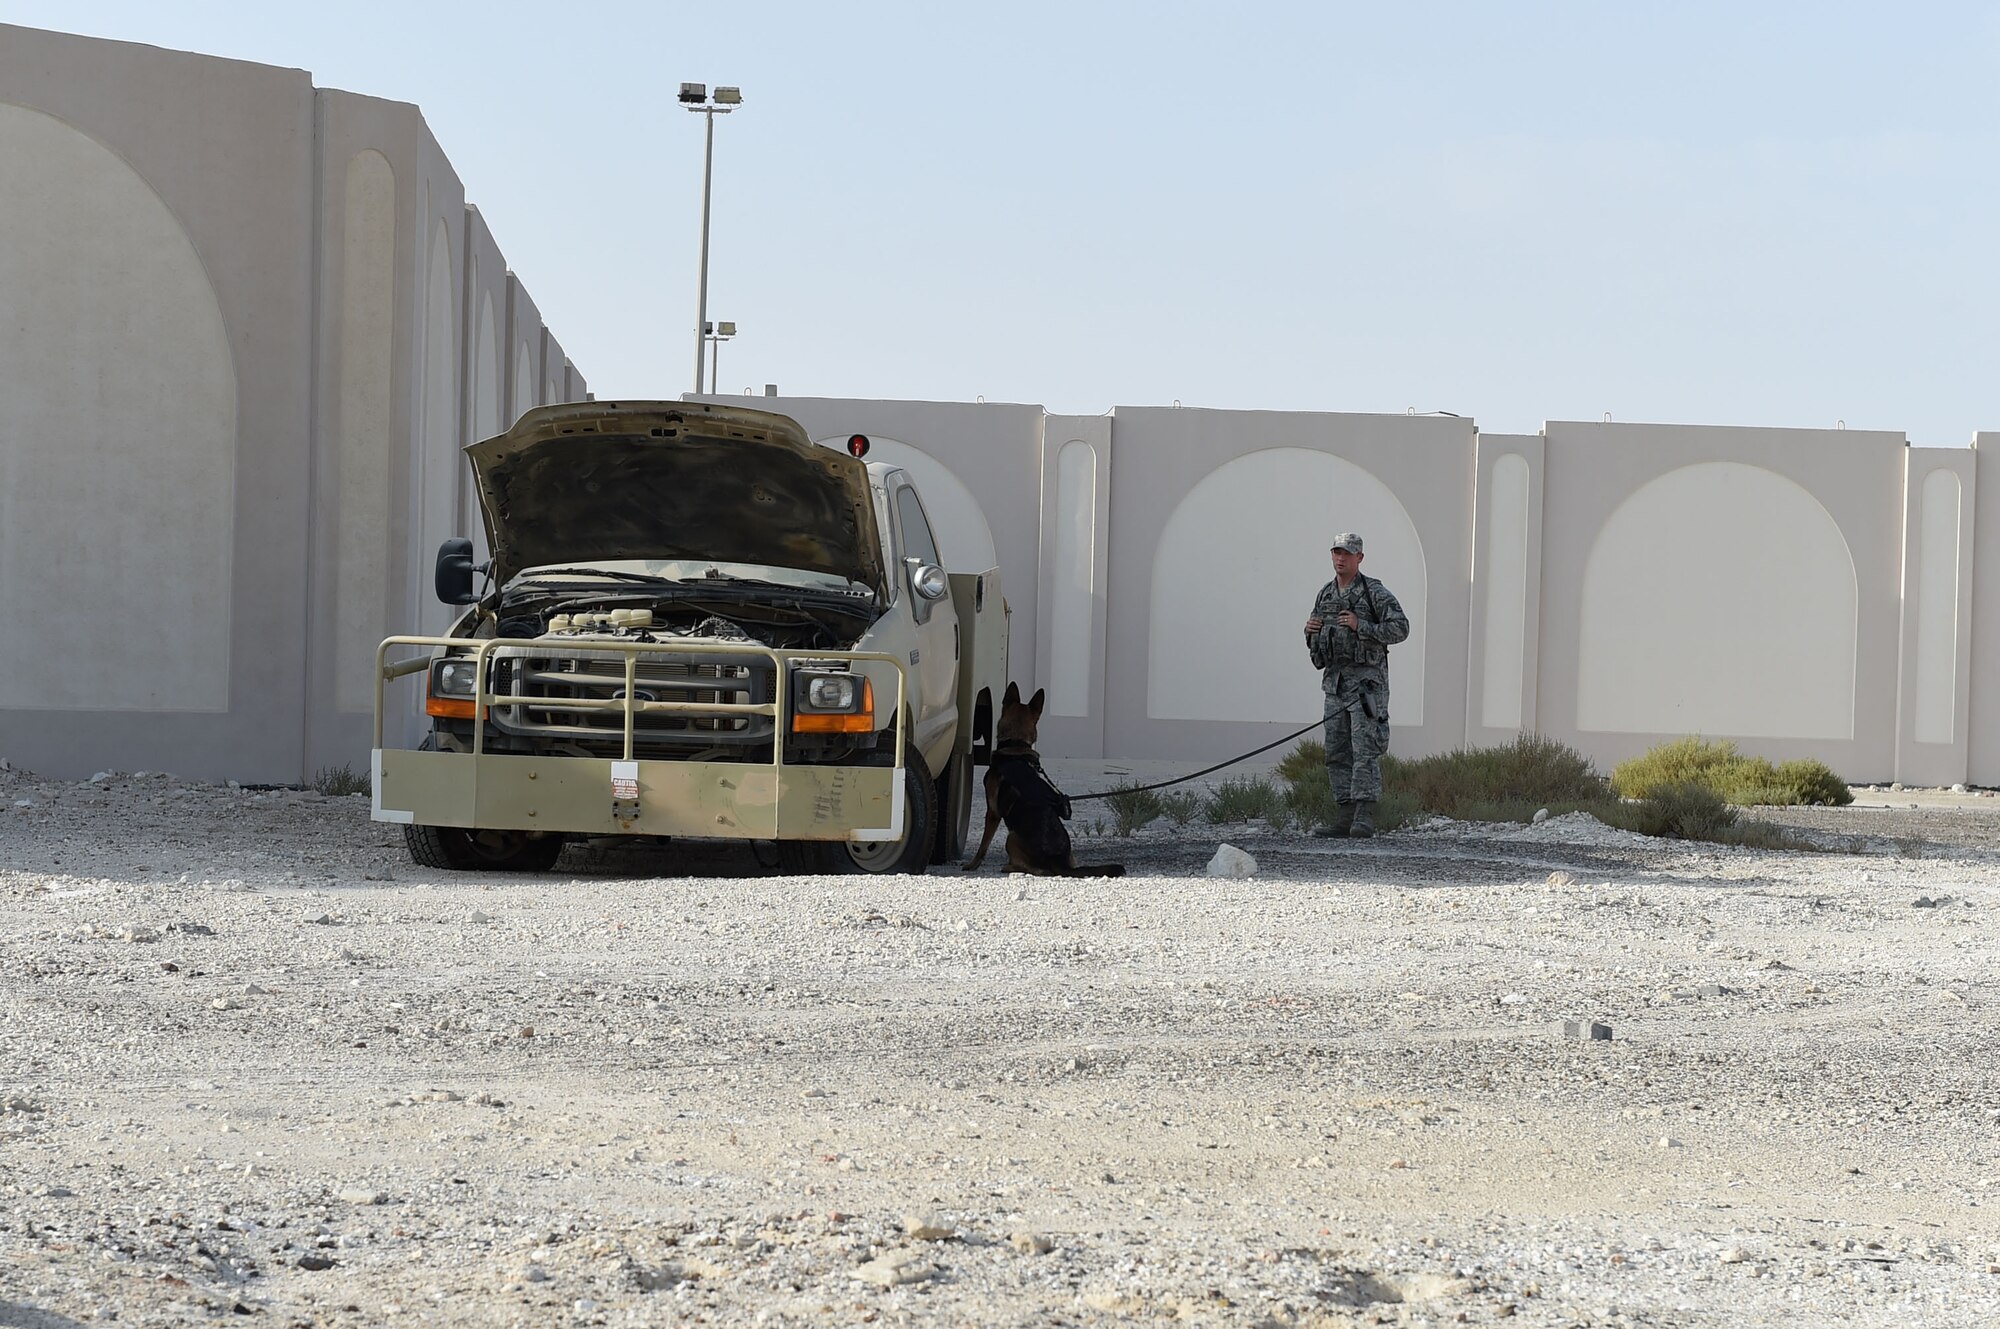 A 380th Expeditionary Security Forces military working dog handler and his dog inspect a suspicious vehicle during a training exercise at an undisclosed location, Nov. 25, 2016. Military working dogs are used for a wide range of activities – in this case, detecting explosive materials; they’re behavioral changes provide handlers with information to assess different situations. (U.S. Air Force photo by Tech. Sgt. Christopher Carwile)